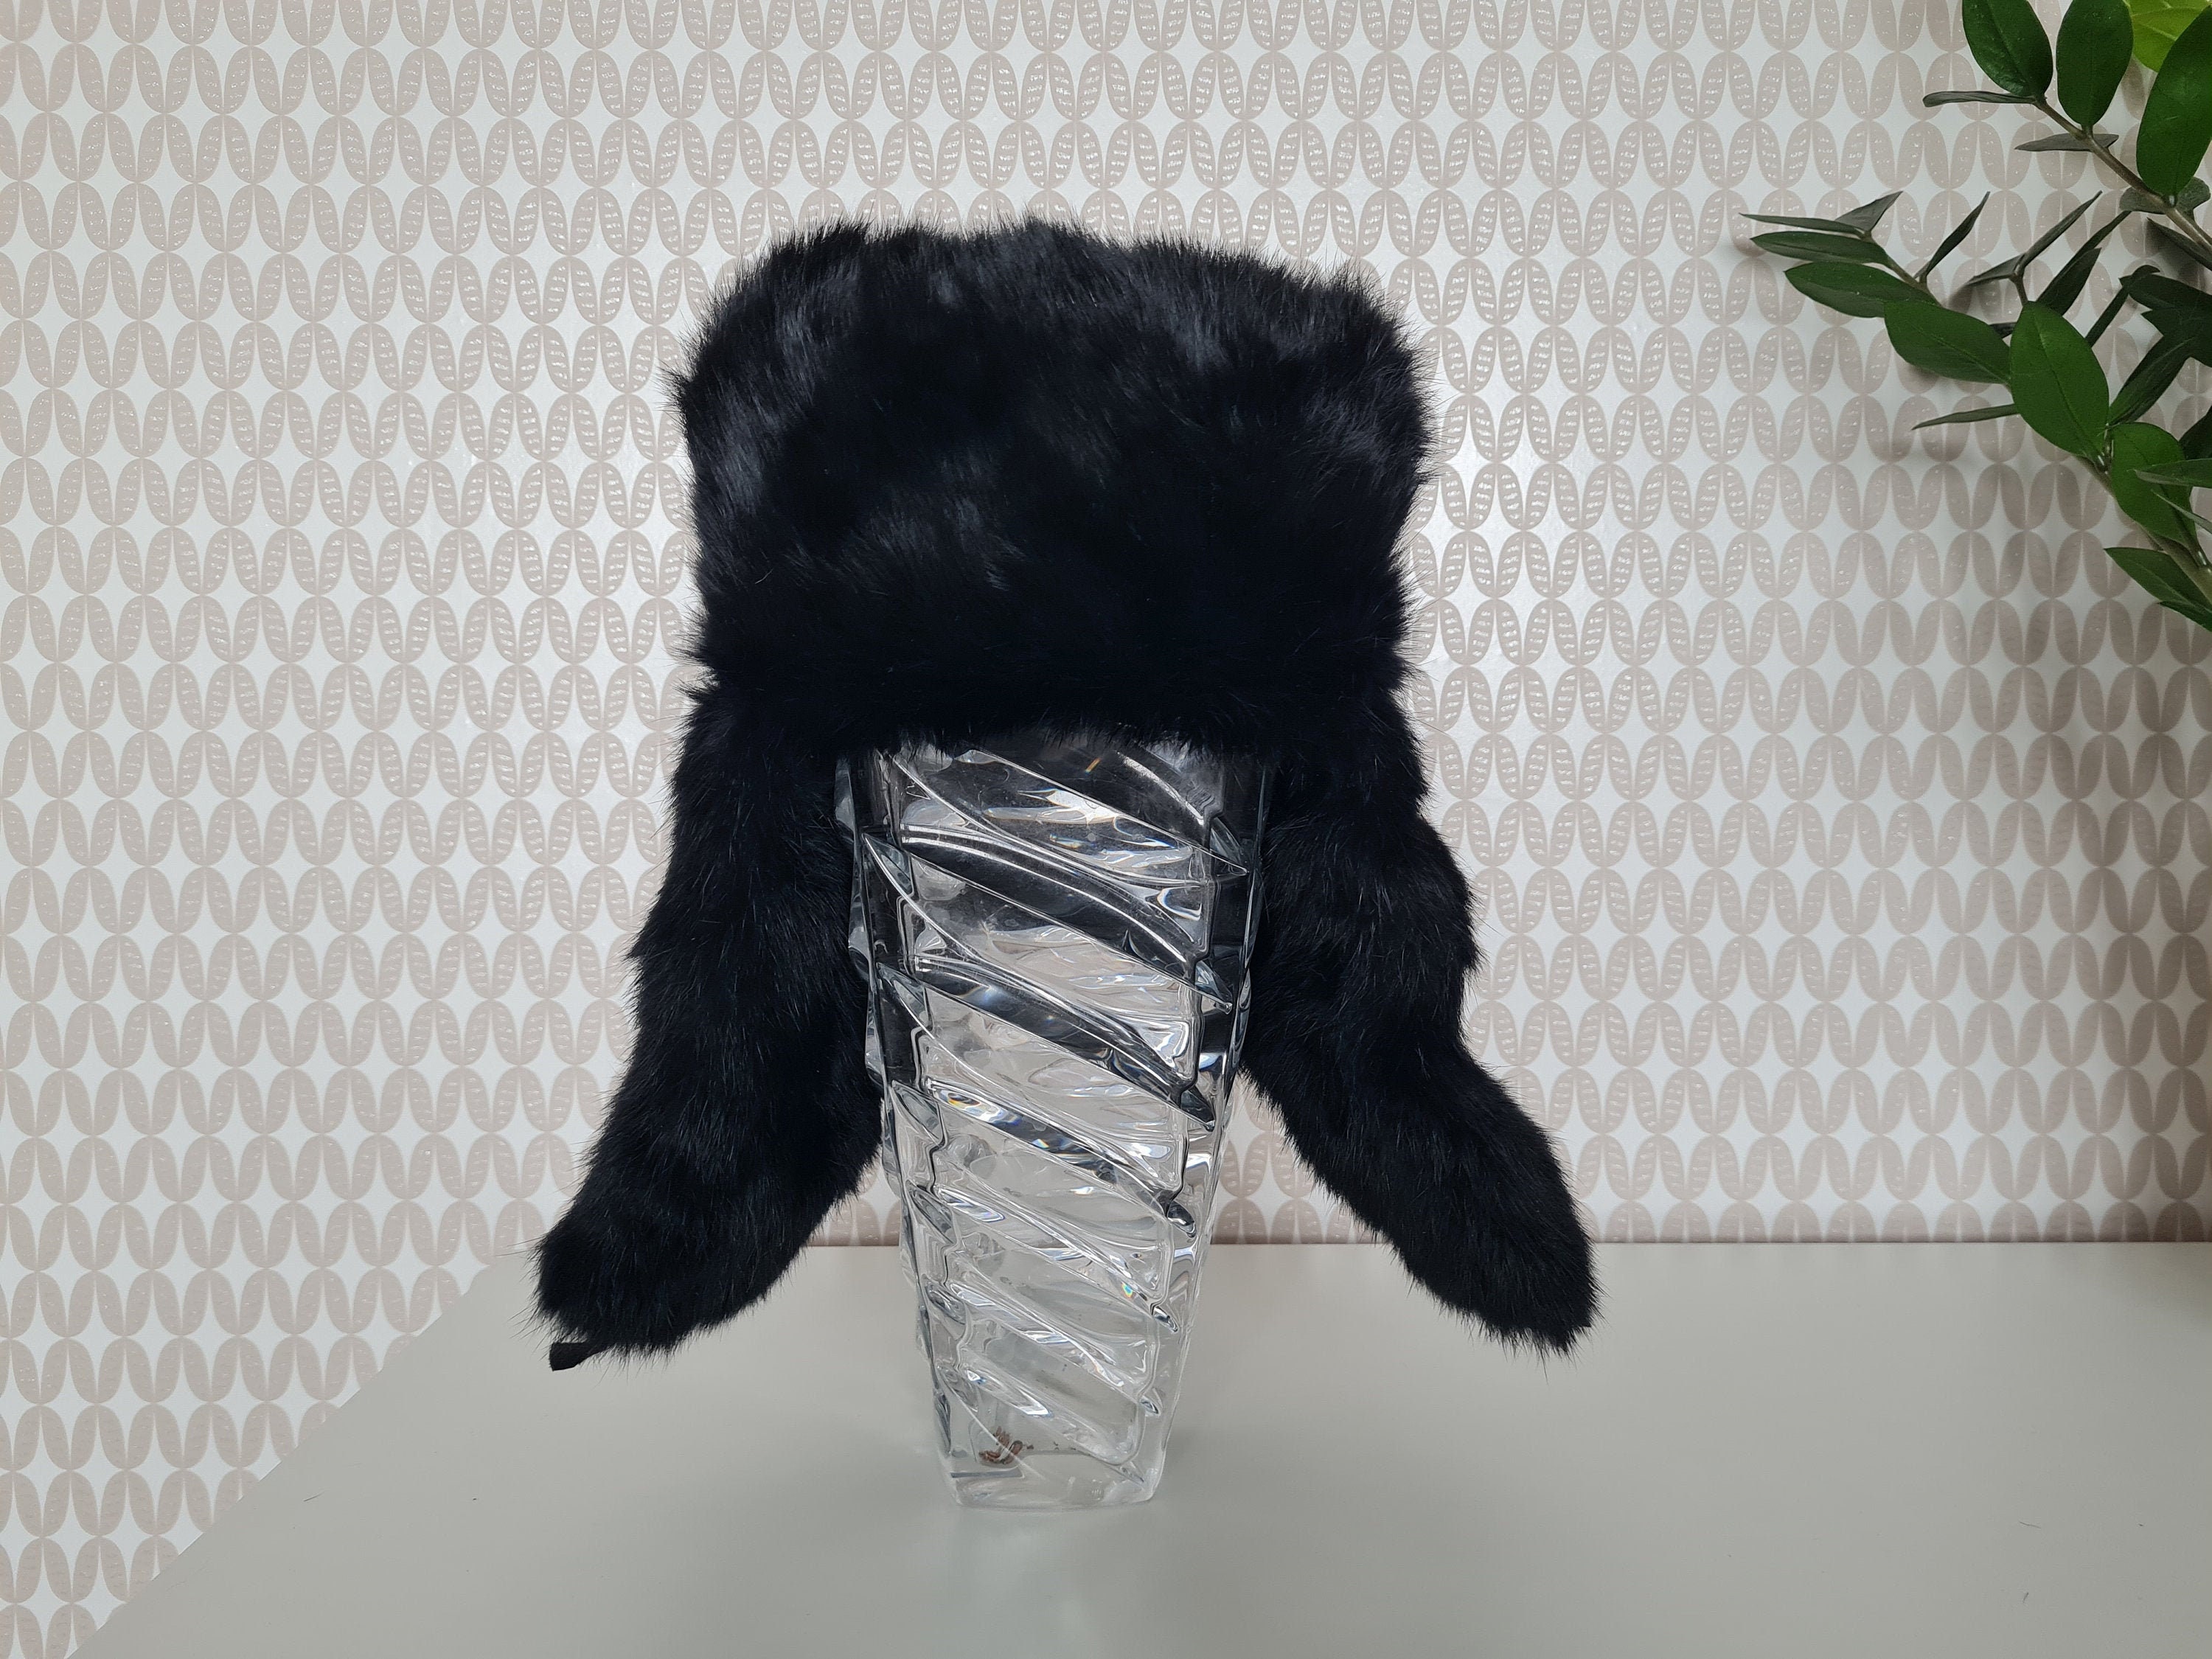 Ushanka hat, made from faux rabbit fur. Photo from our catalog, shot by  @luisperezdop